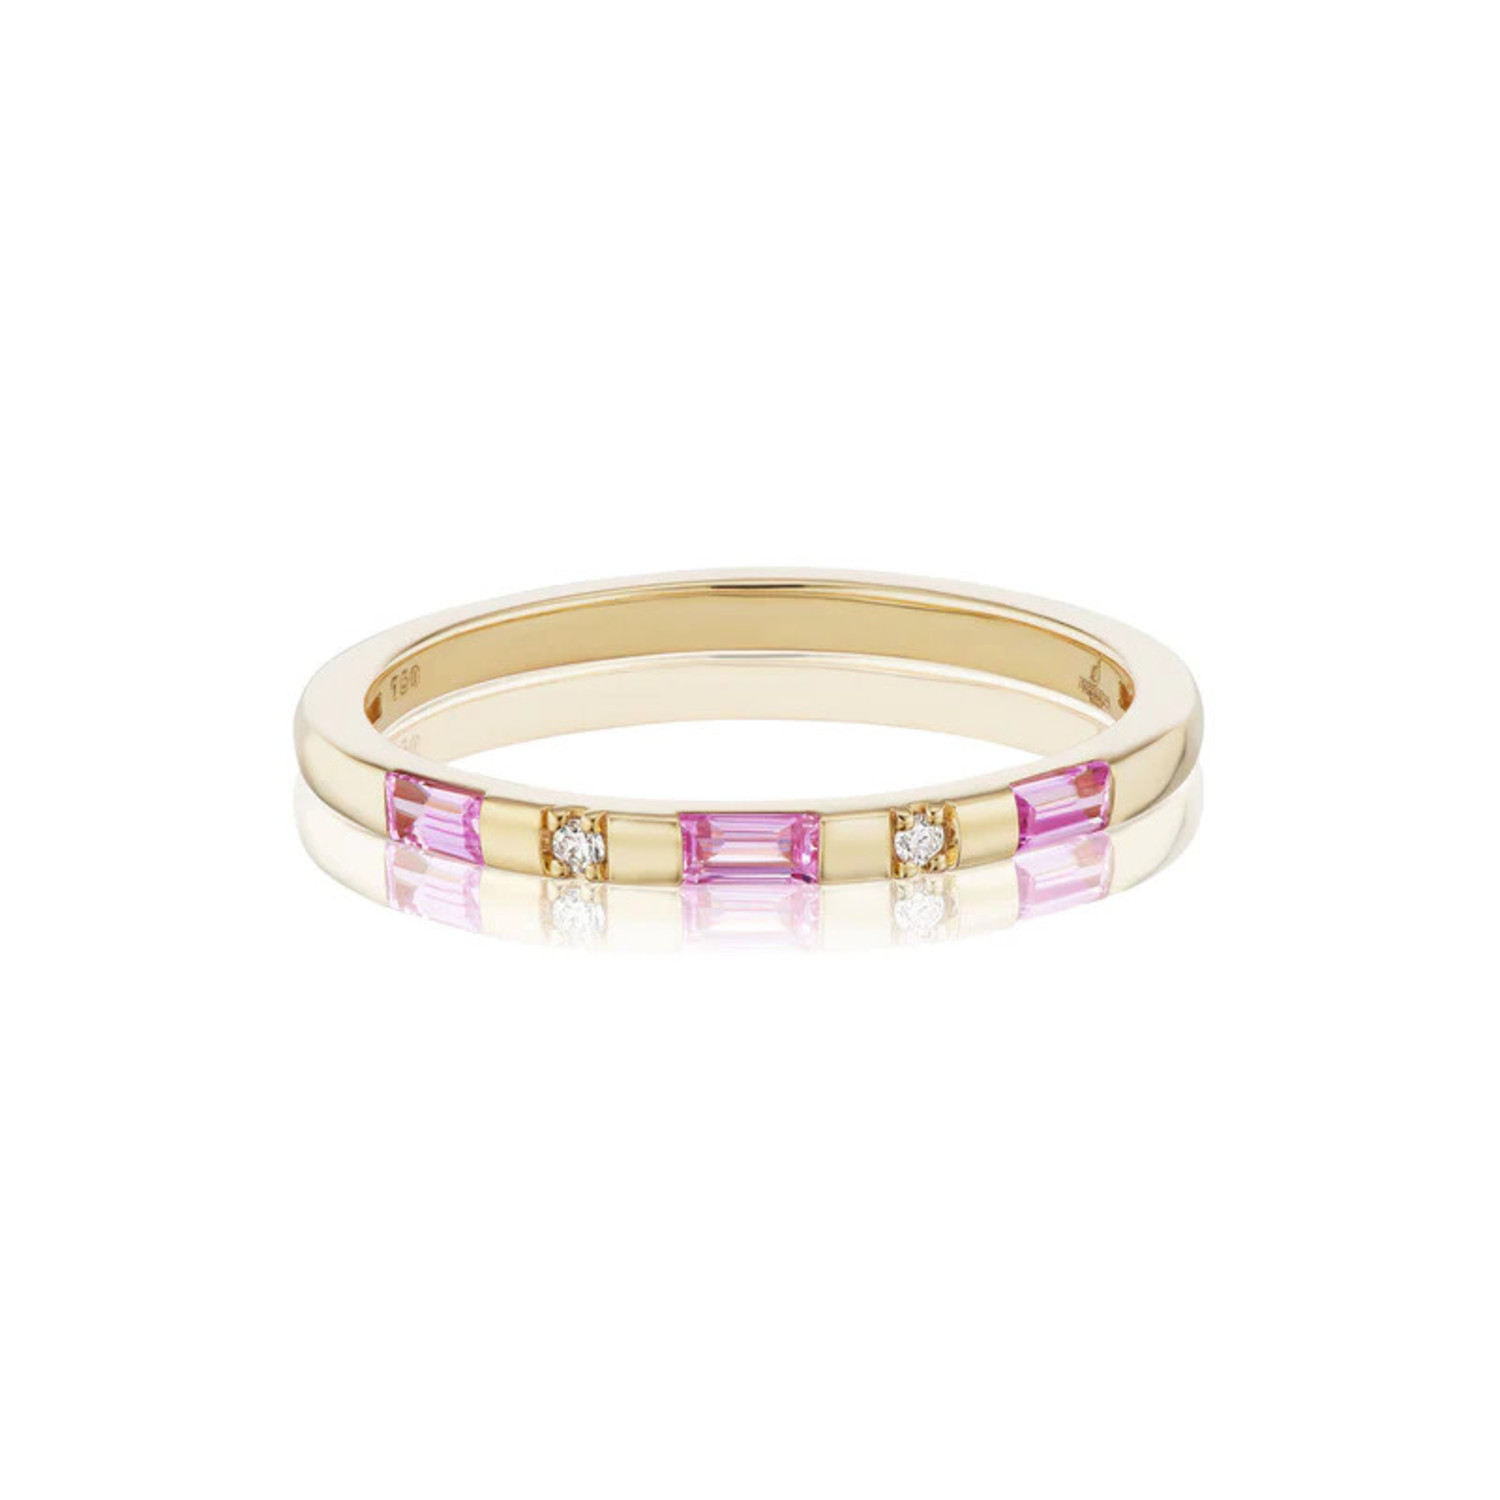 Pink Sapphire and Diamond Singe Row Tarot Baguette Band in 18K Yellow Gold